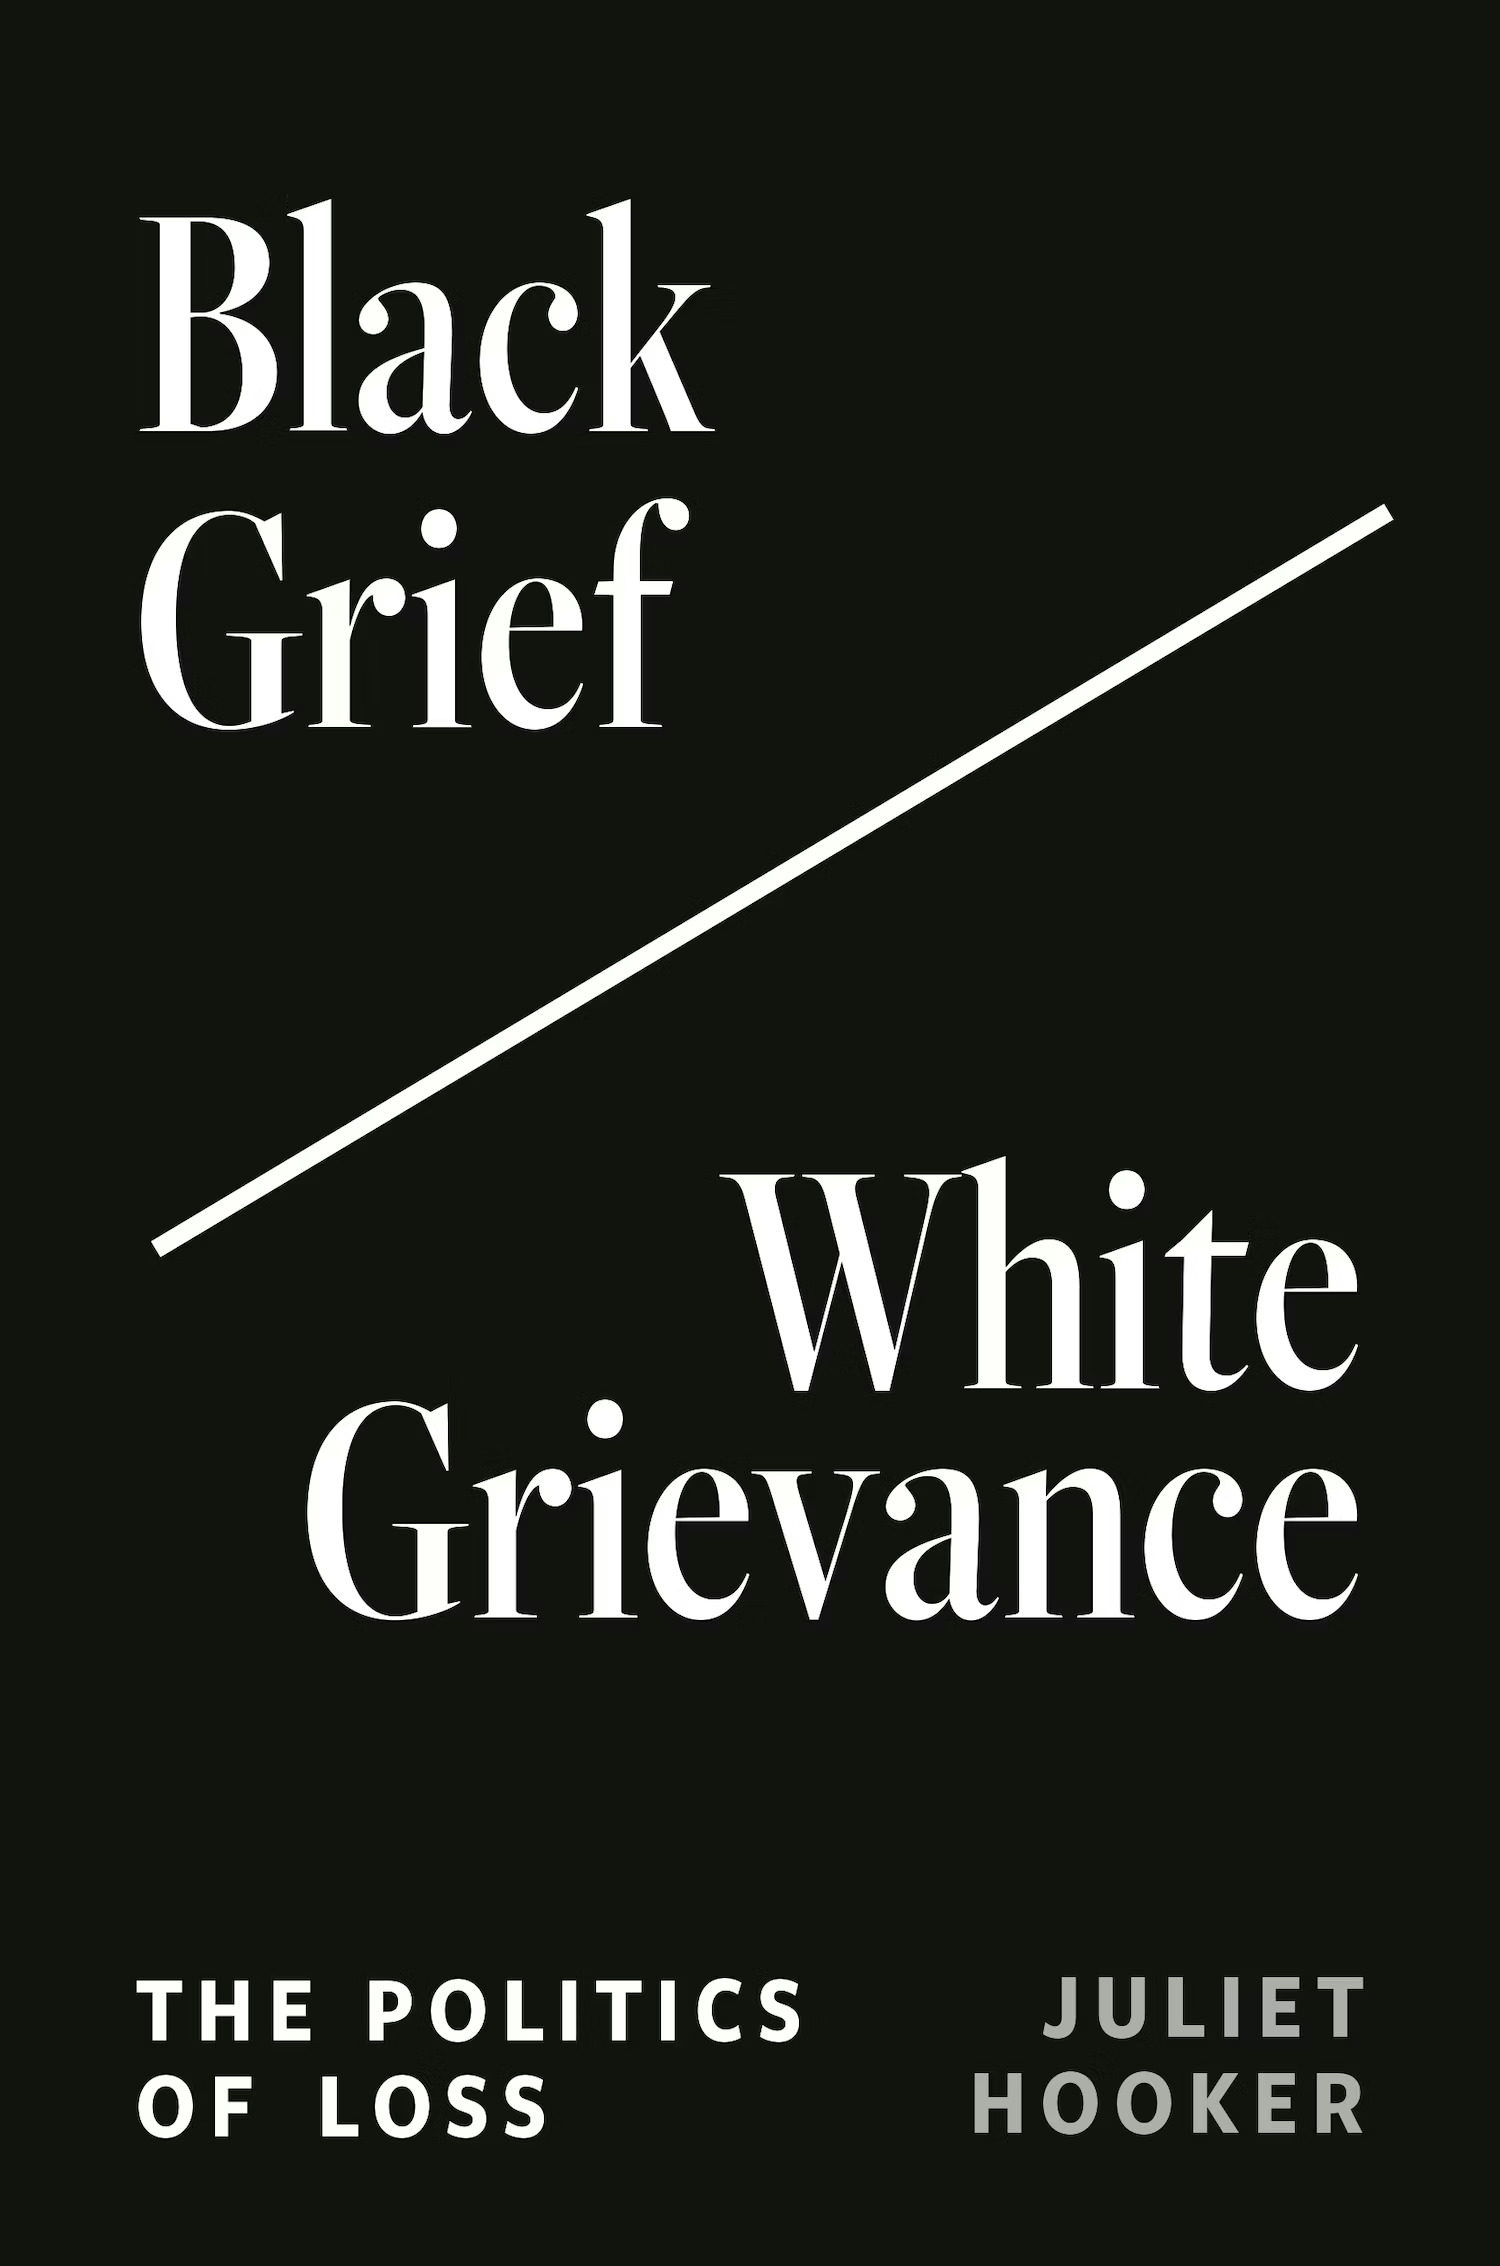 Black Grief/White Grievance Book by Juliet Hooker book cover